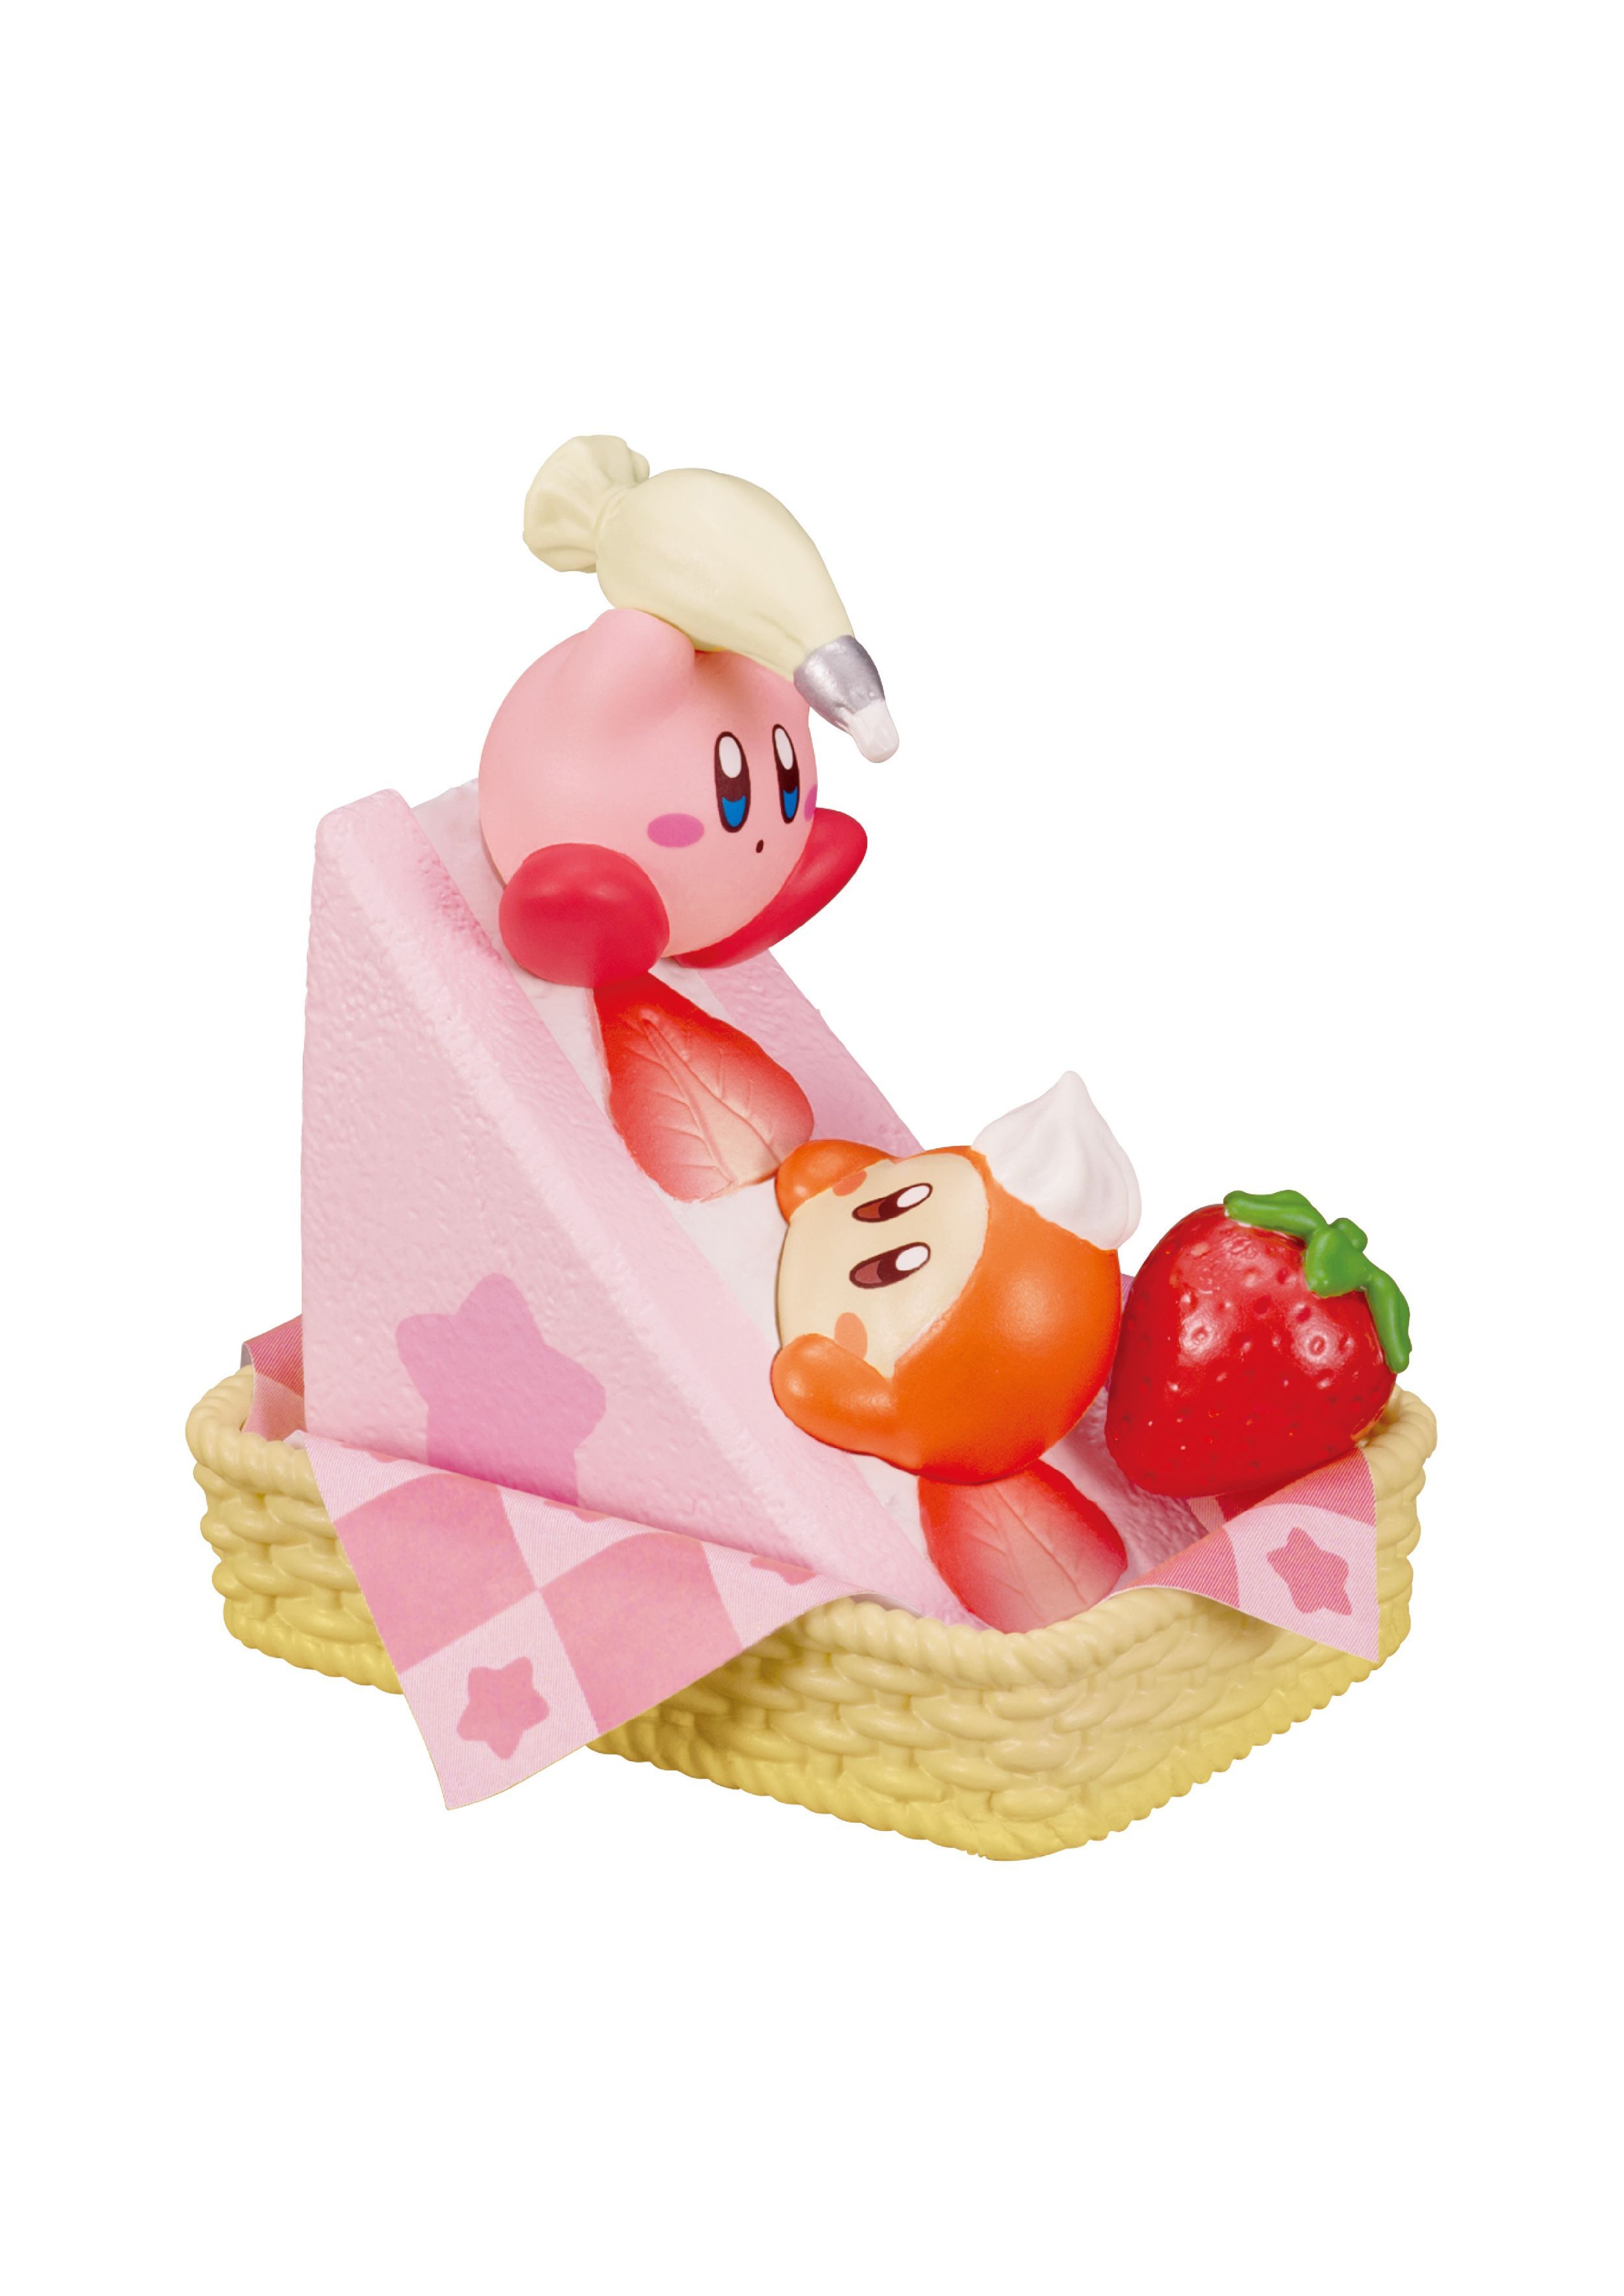 Kirby - Bakery Cafe Blind image count 2